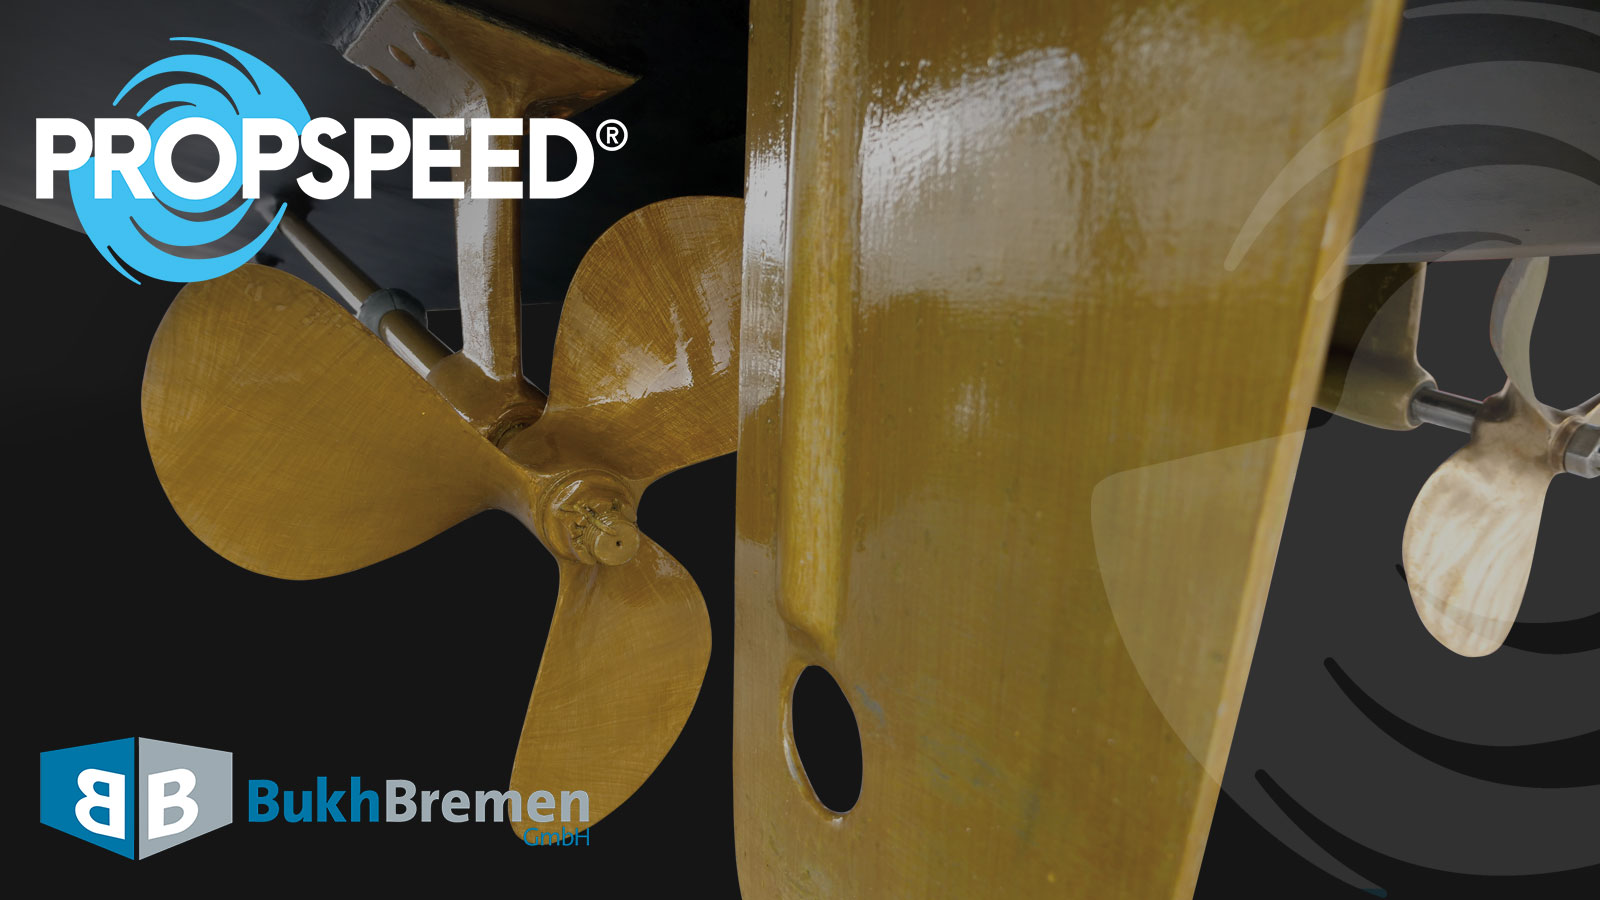 Propspeed partners with Bukh Bremen